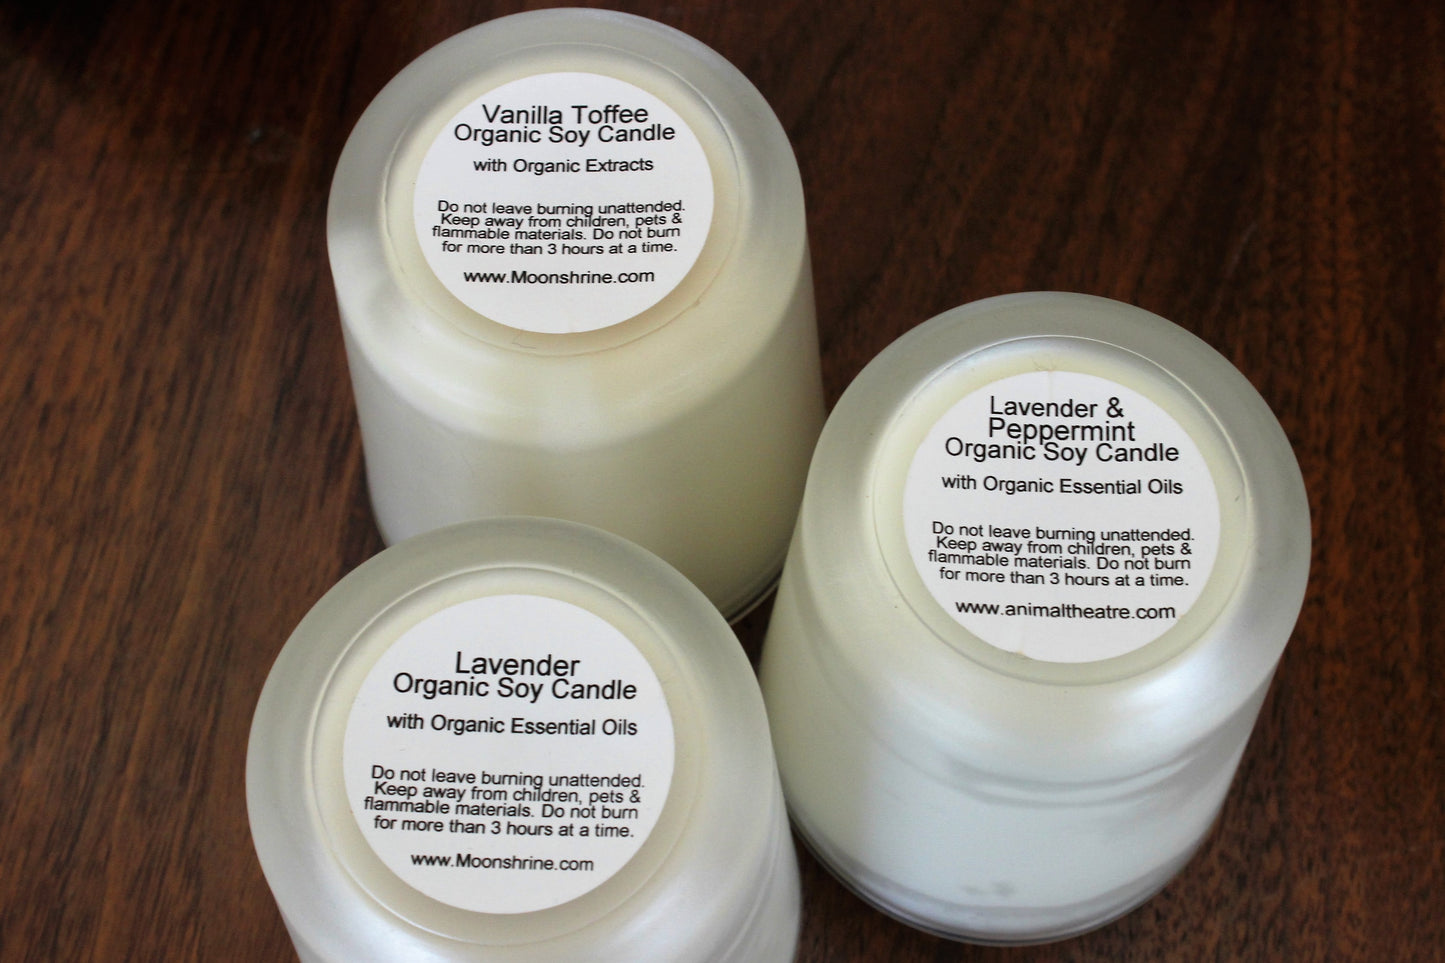 Organic Soy Candle In Three Scents: Lavender, Vanilla Toffee, Lavender Peppermint 